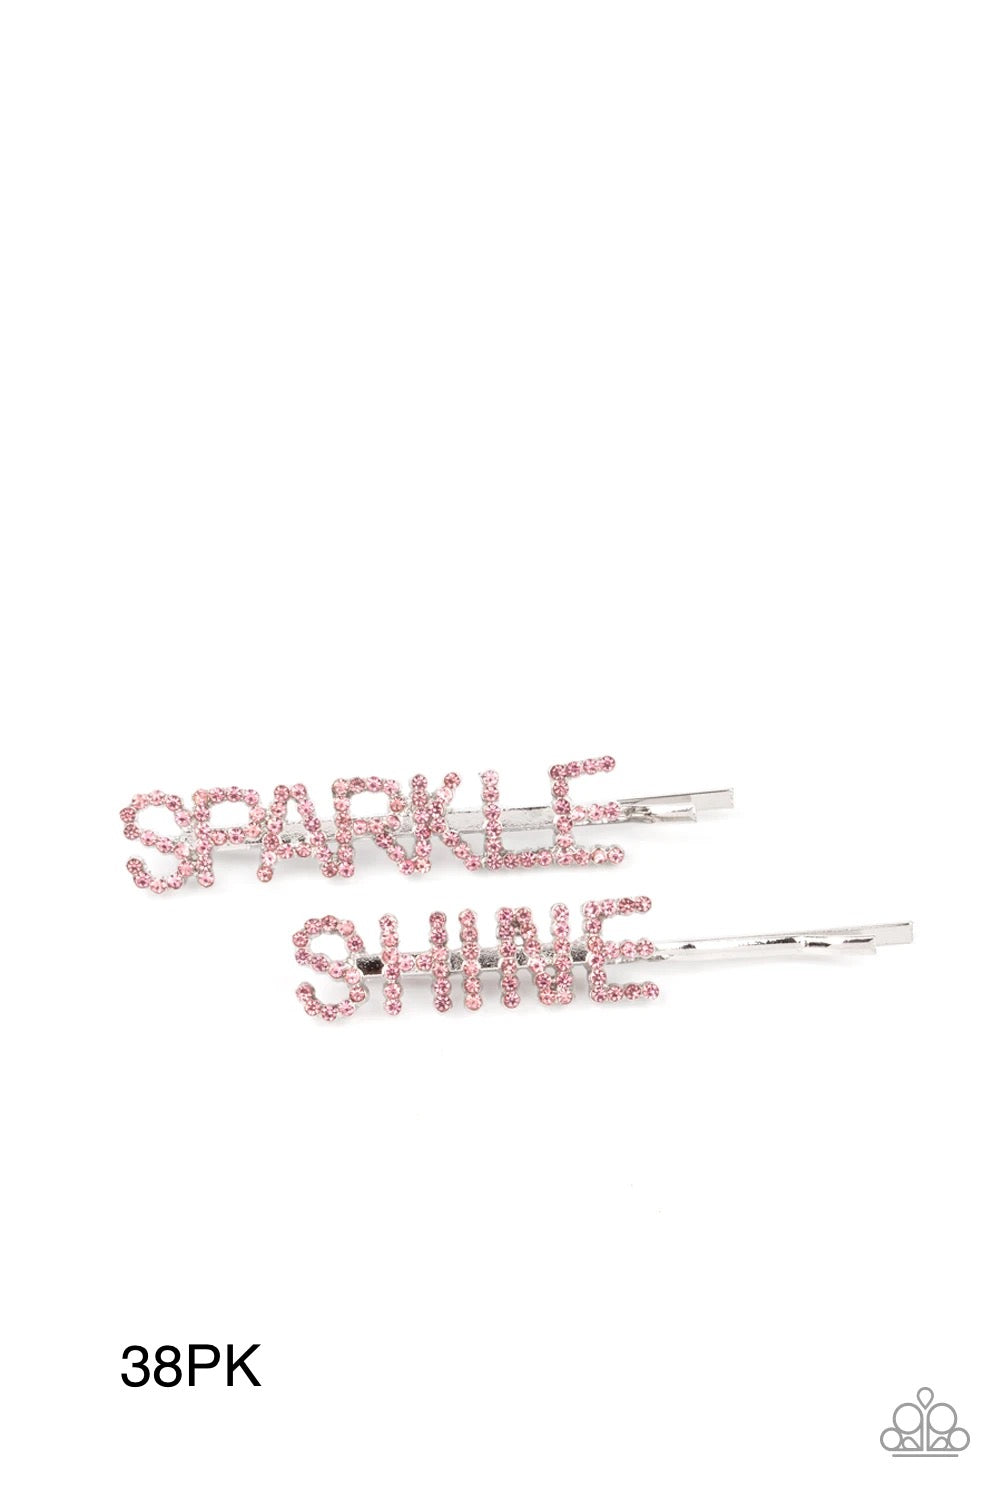 “Center of the SPARKLE-verse” Pink Hair Clip